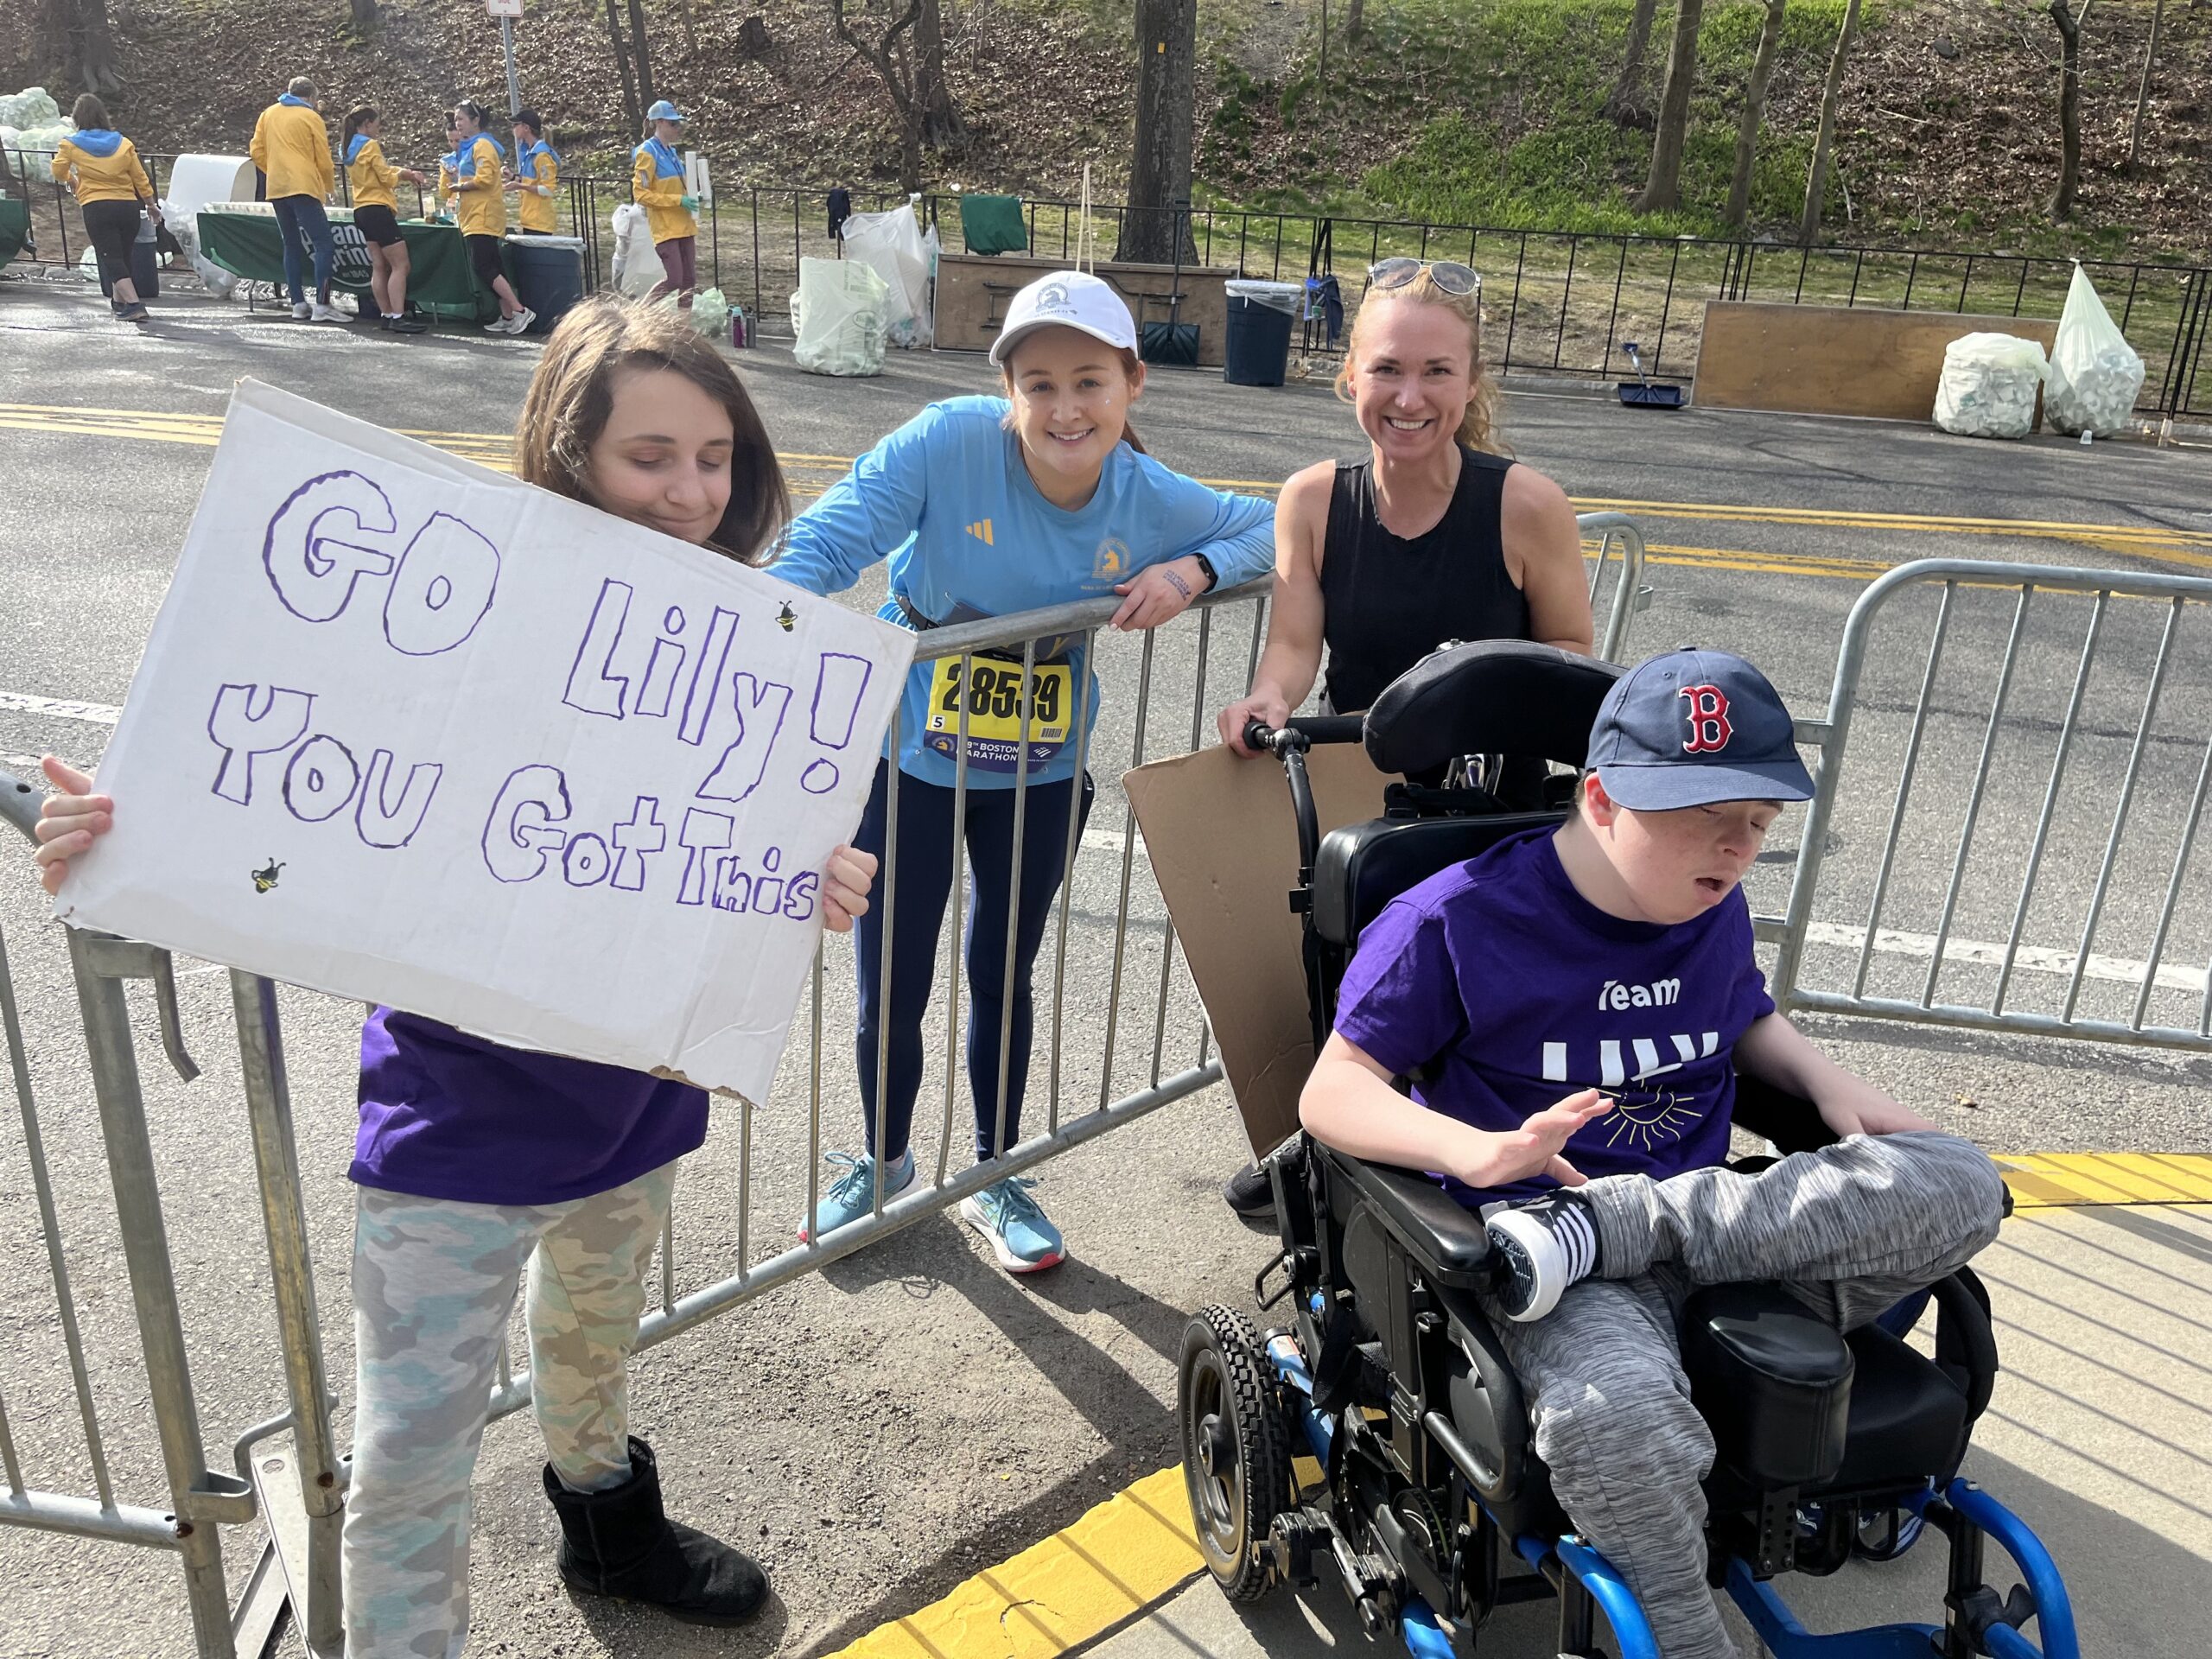 Lily standing next to two of her students and one parent. One of the students is sitting in a wheelchair and the other one is standing and holding a sign that says "Go Lily! You got this"